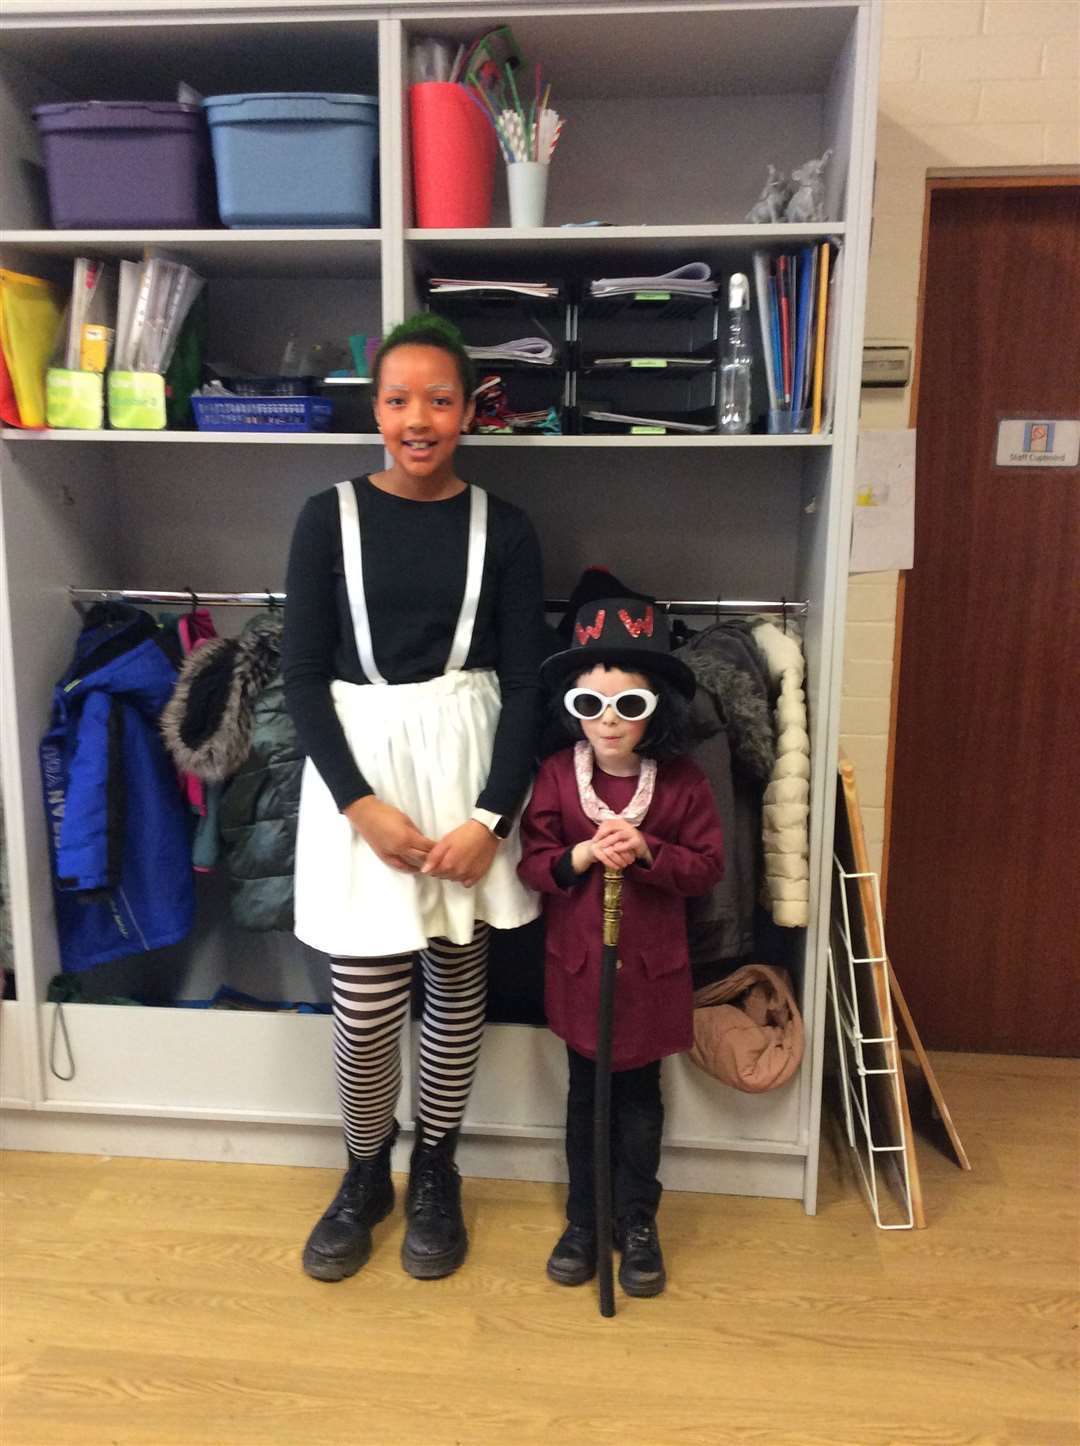 Willy Wonka inspired the clothes worn by this pair.